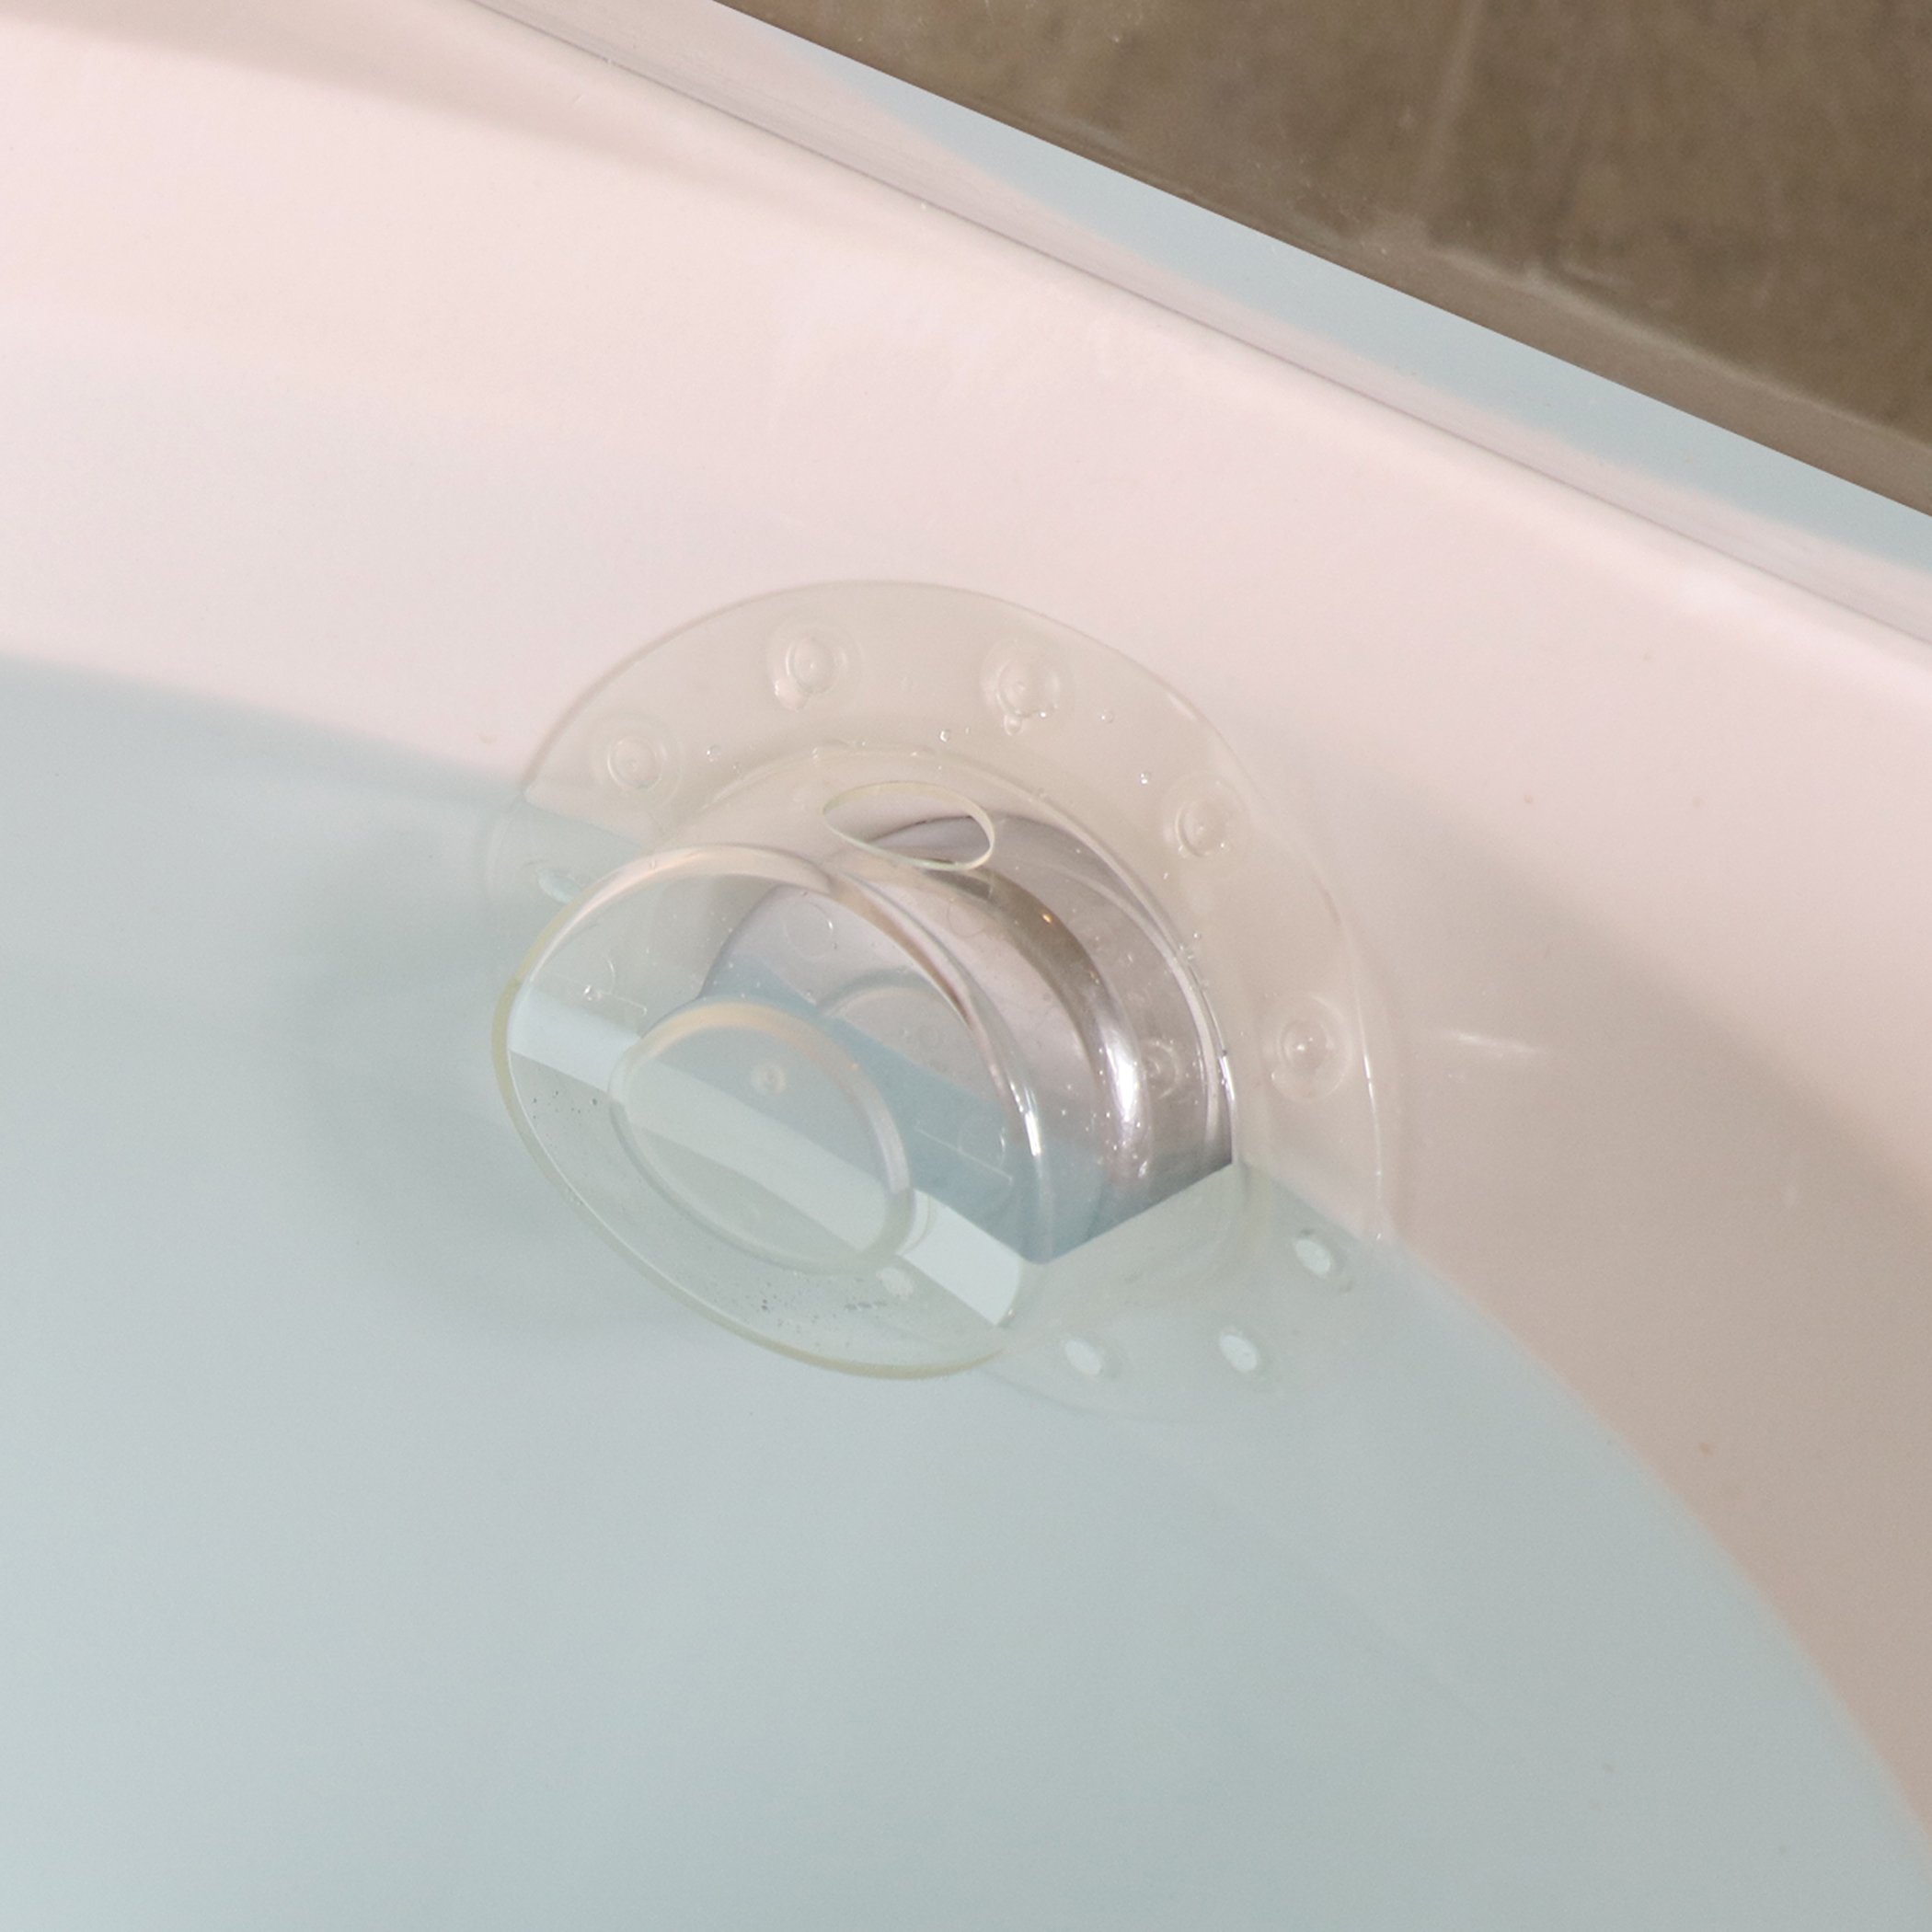 SlipX Bottomless Bath Overflow Drain Cover Review 2021